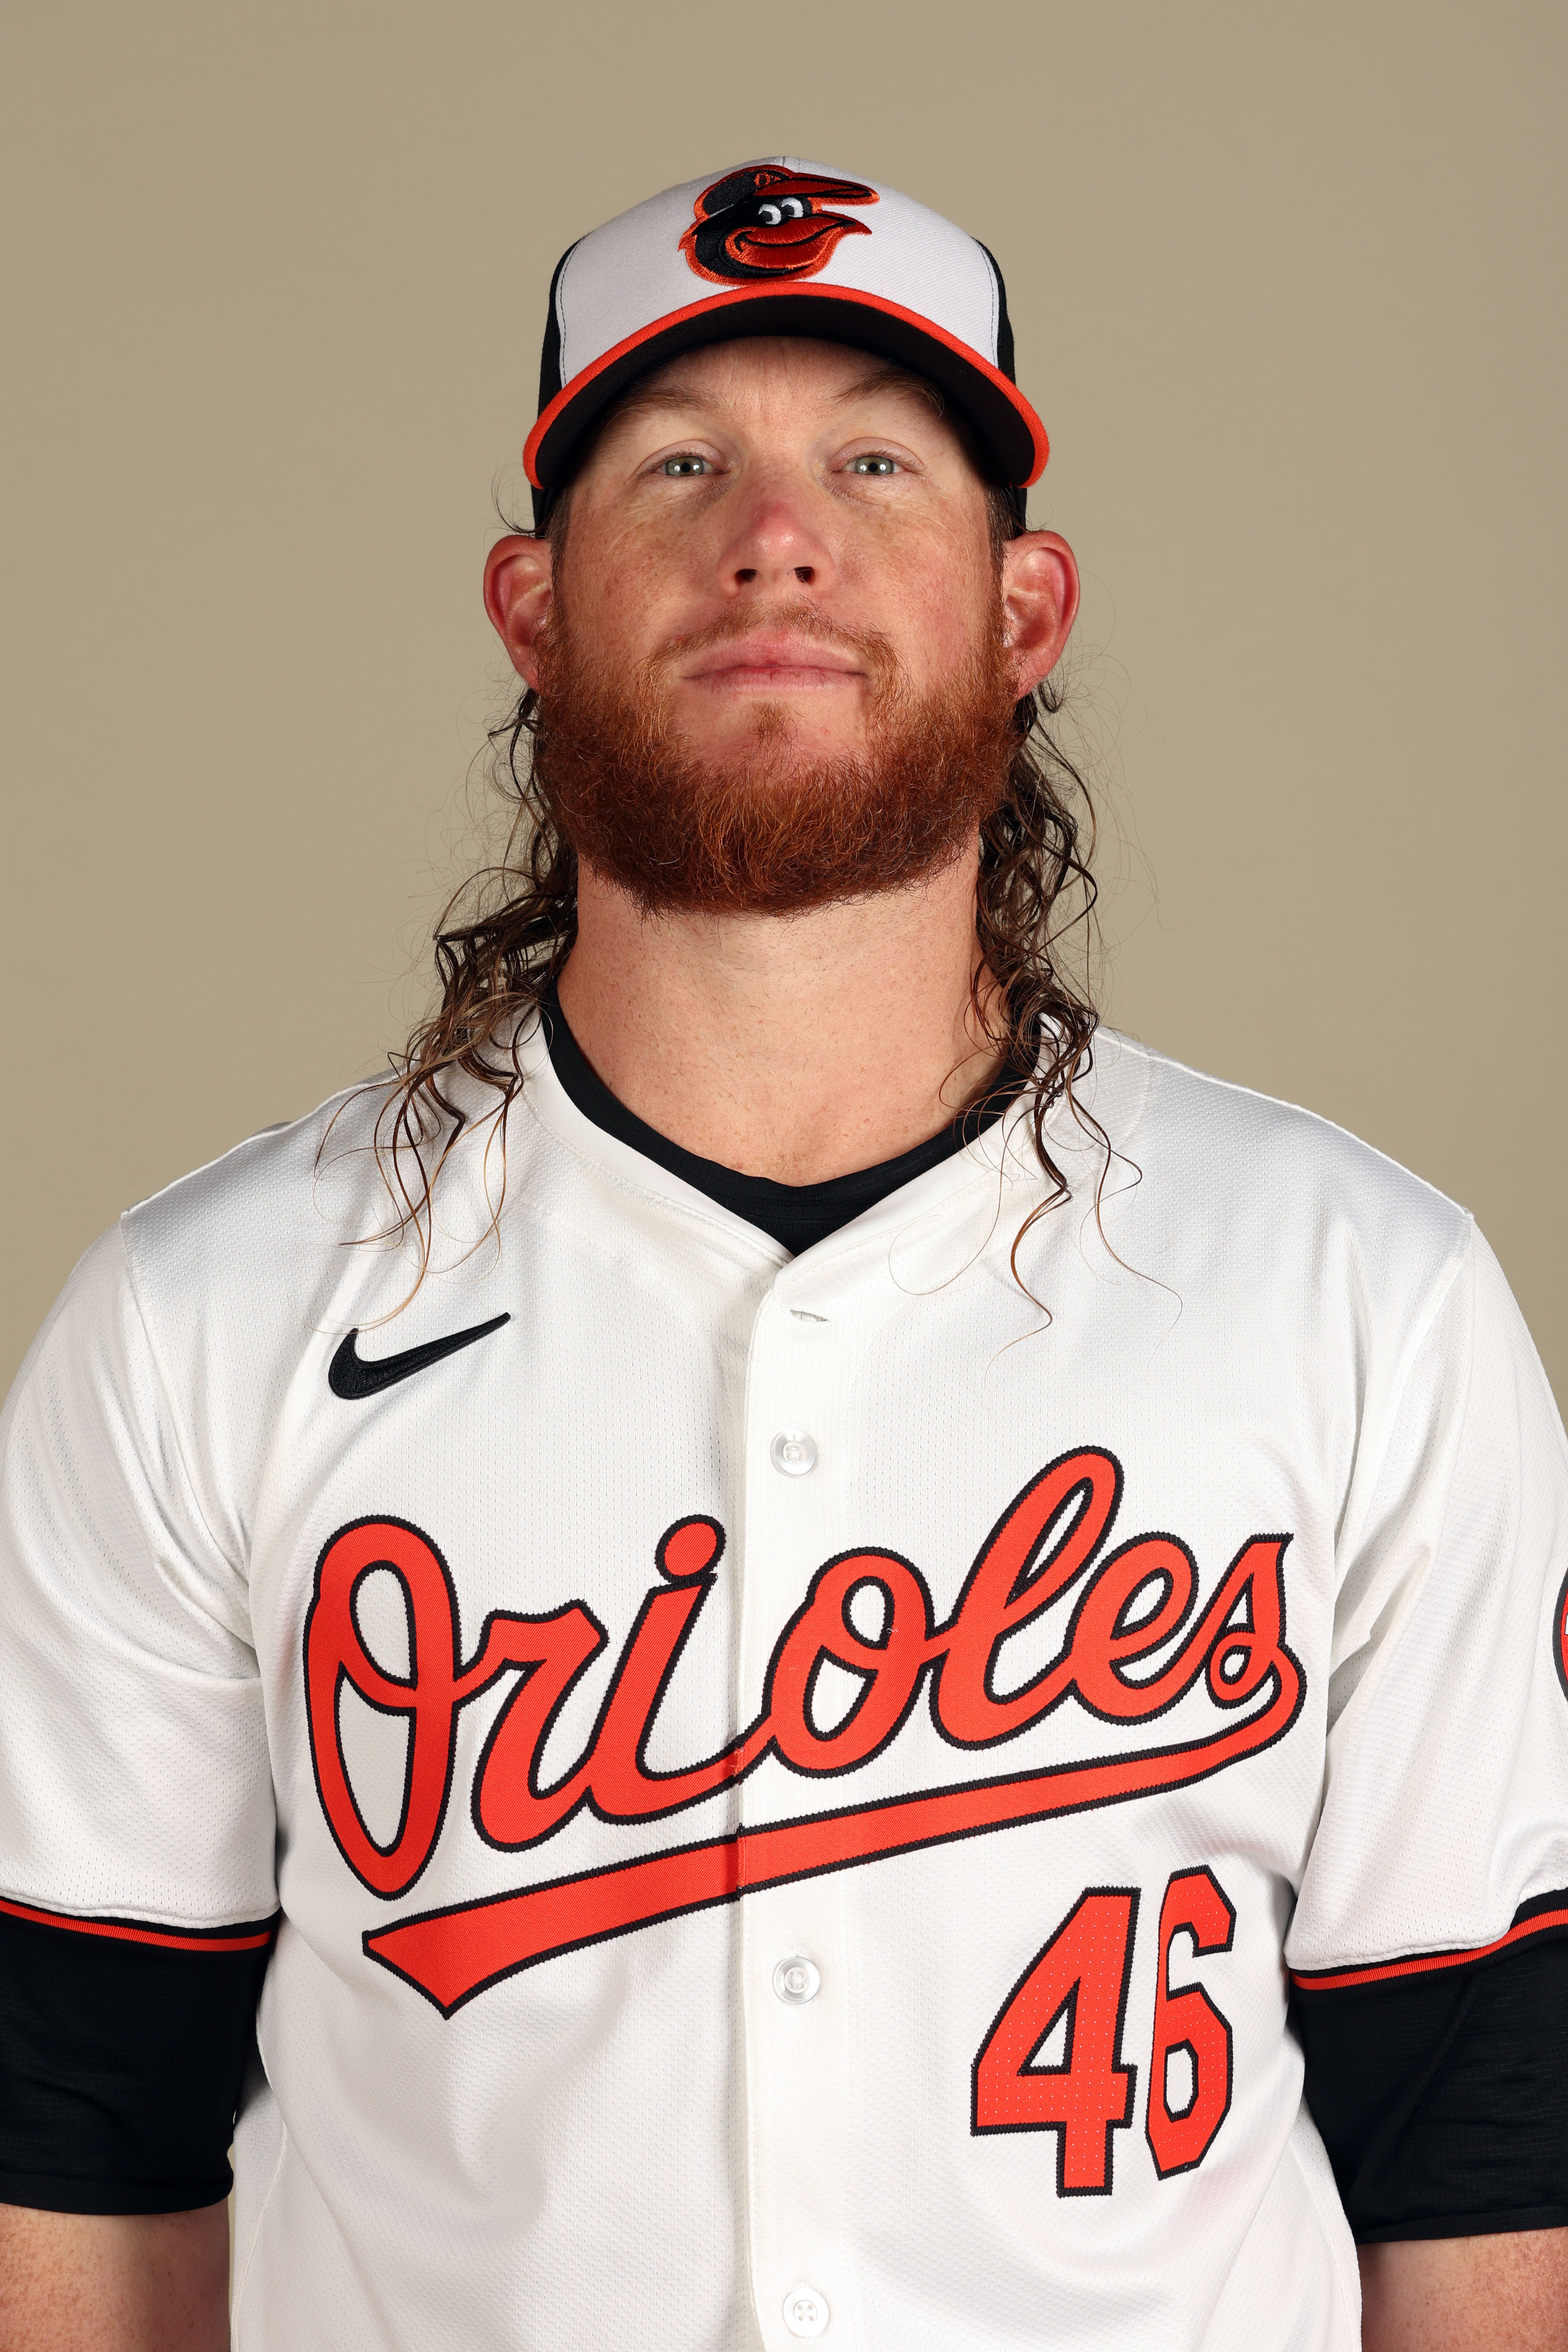 Craig Kimbrel, a man with a red beard and greasy-looking red hair, wearing a white Orioles uniform and white-panel Orioles hat with the Cartoon Bird logo